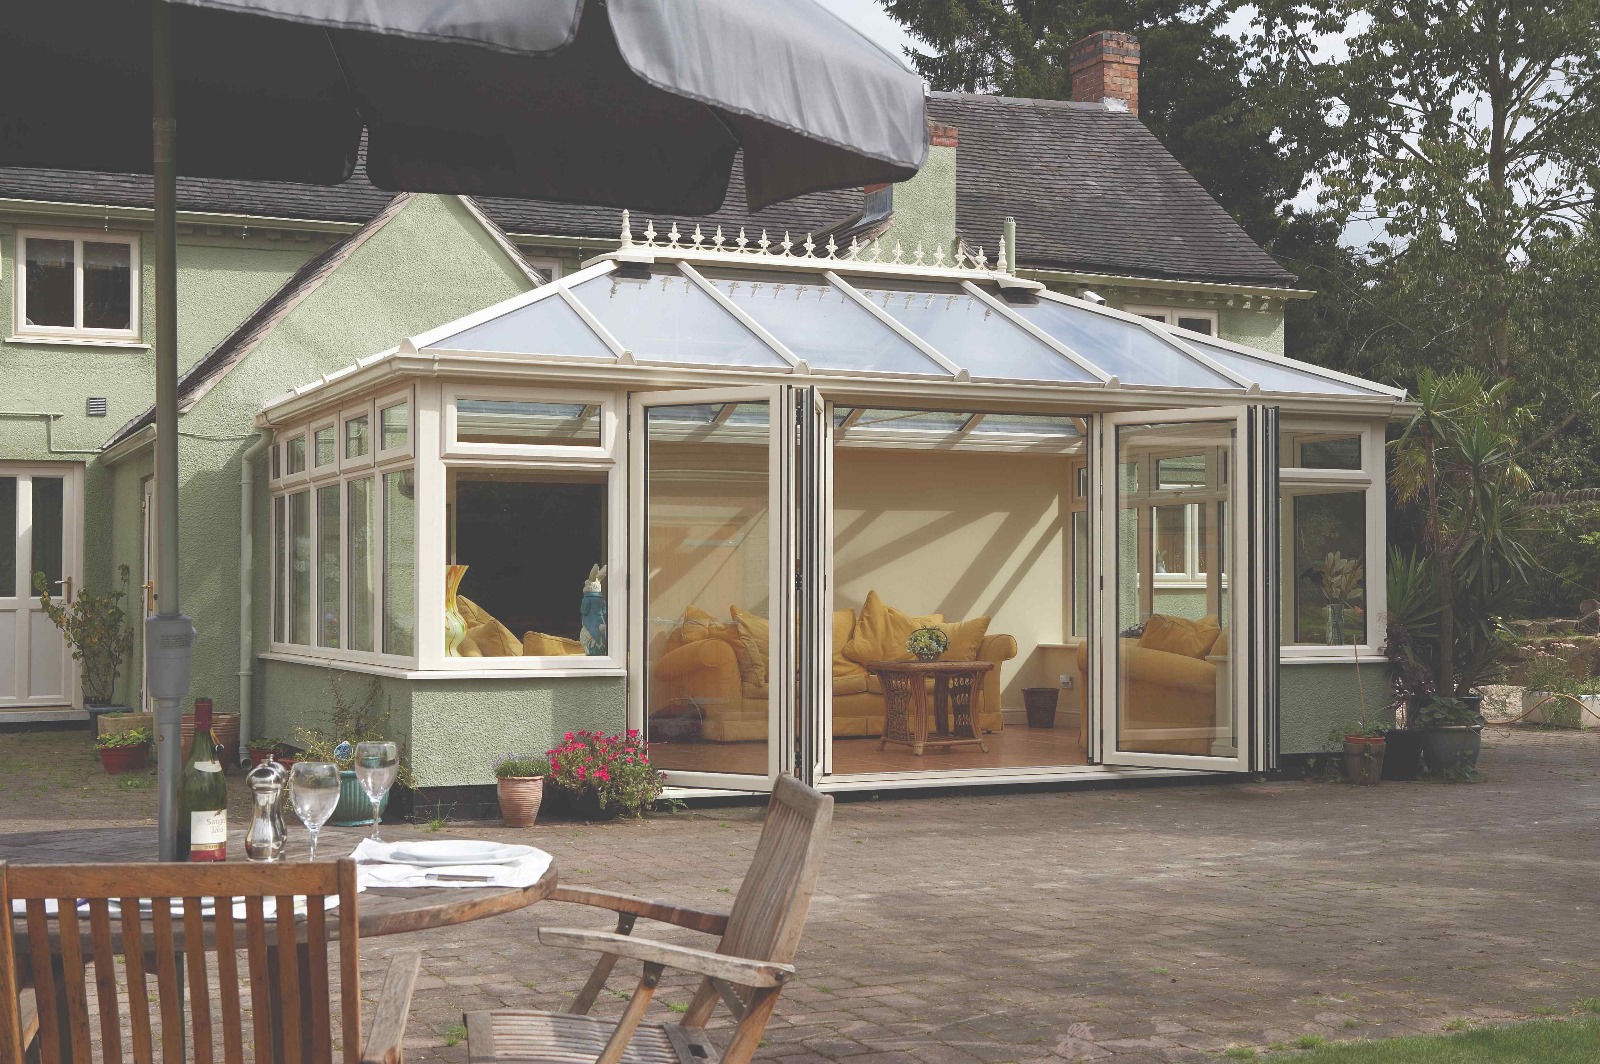 Conservatory Extensions Installations By Safe and sound windows